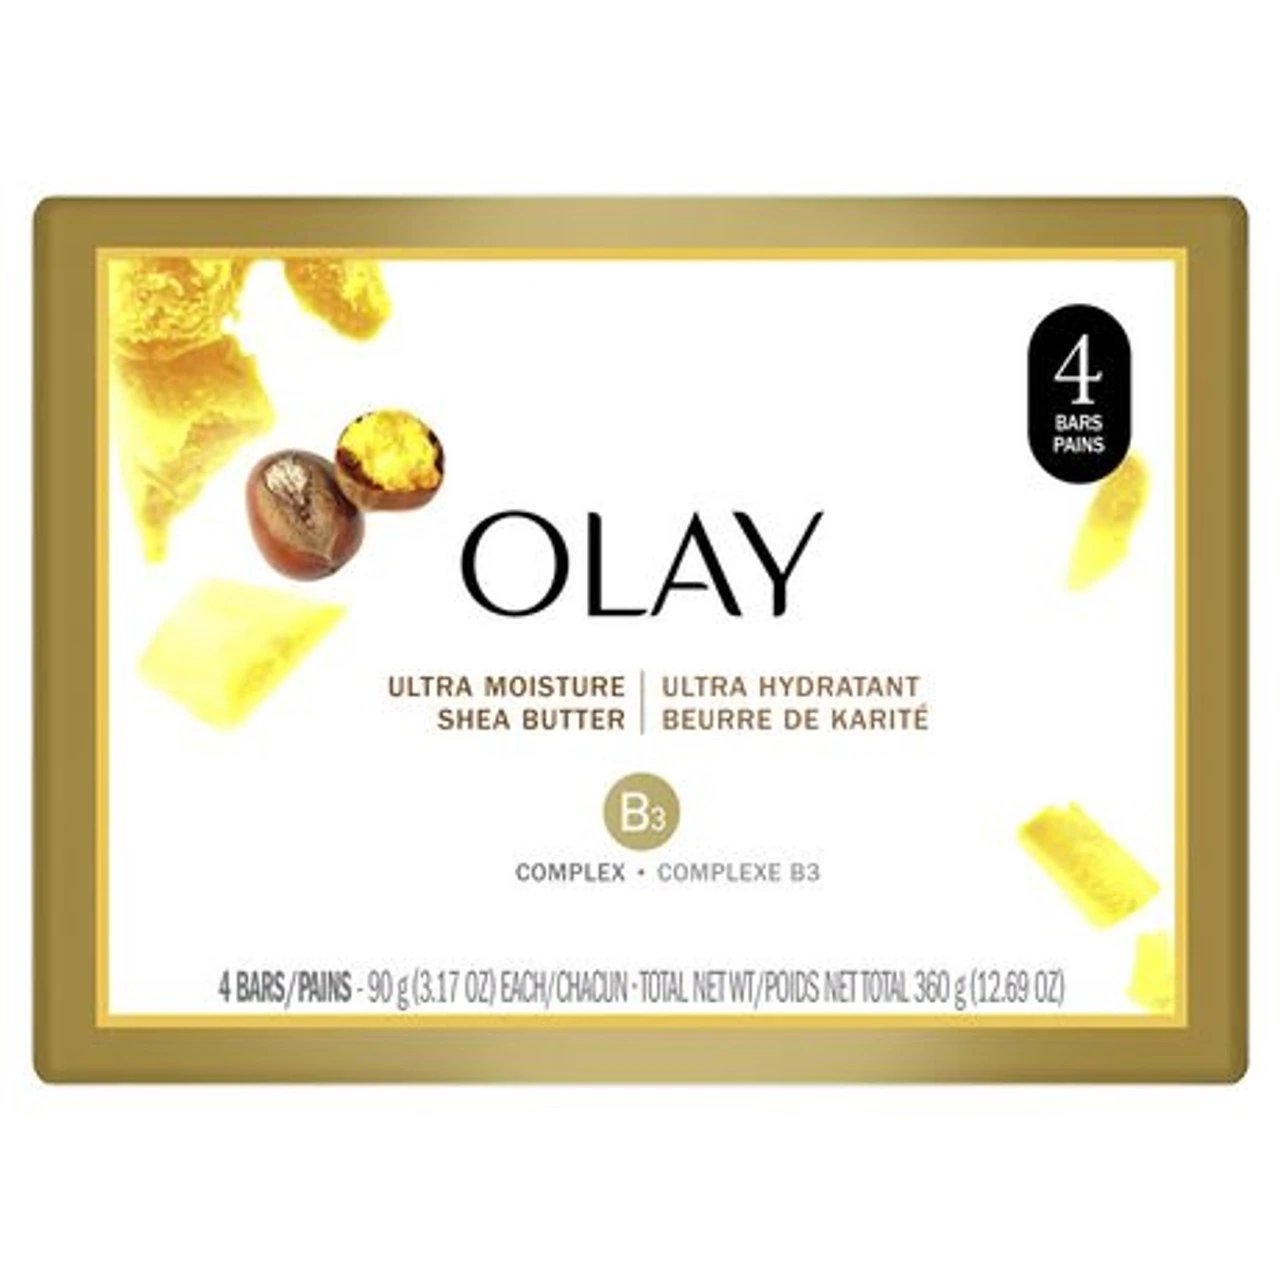 Olay Ultra Moisture Shea Butter with B3 Complex Soap Bars, 4 X 90 g